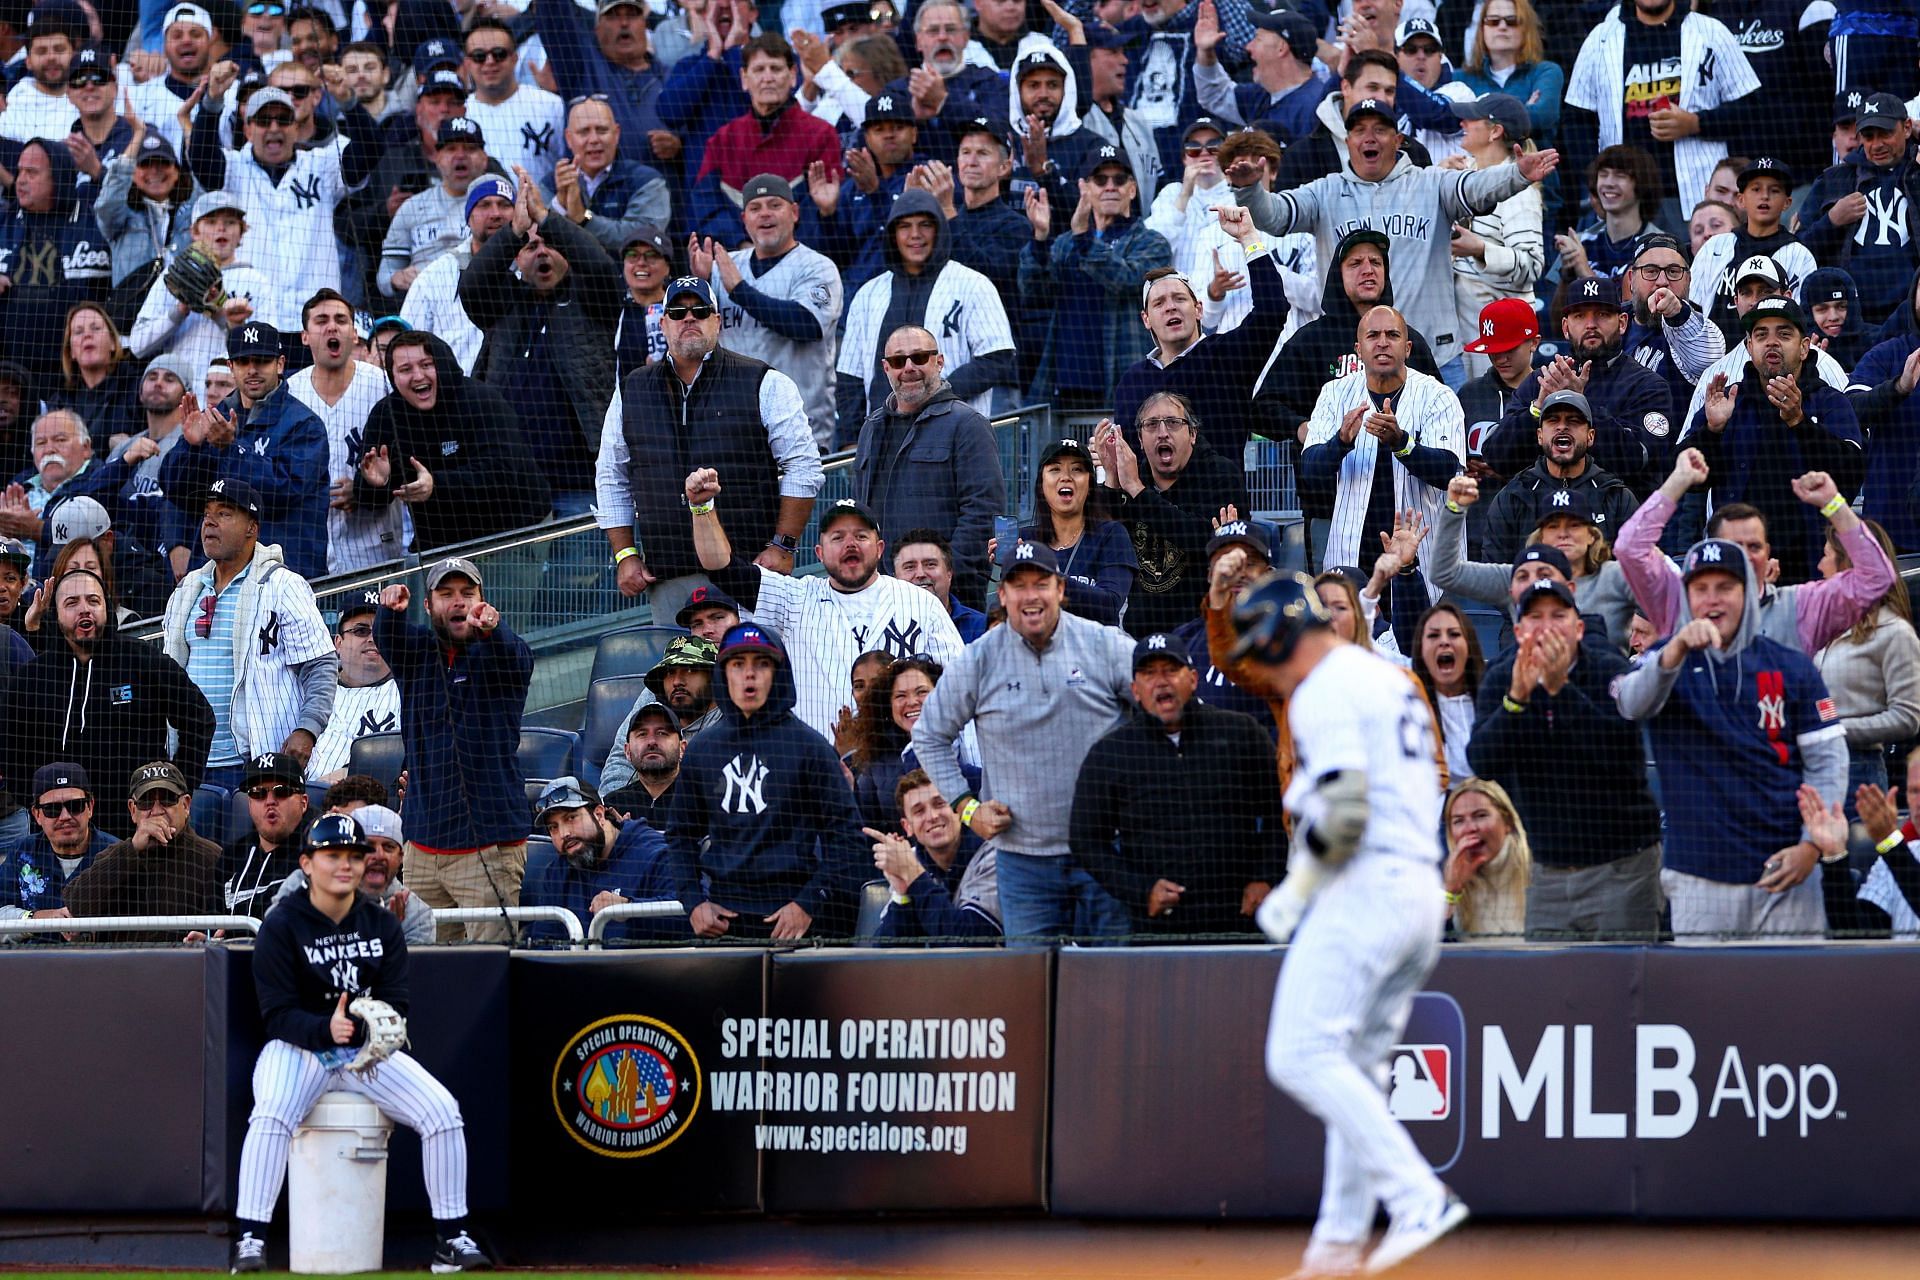 Mixed Emotions for Yankees Fans on Delayed Home Opener